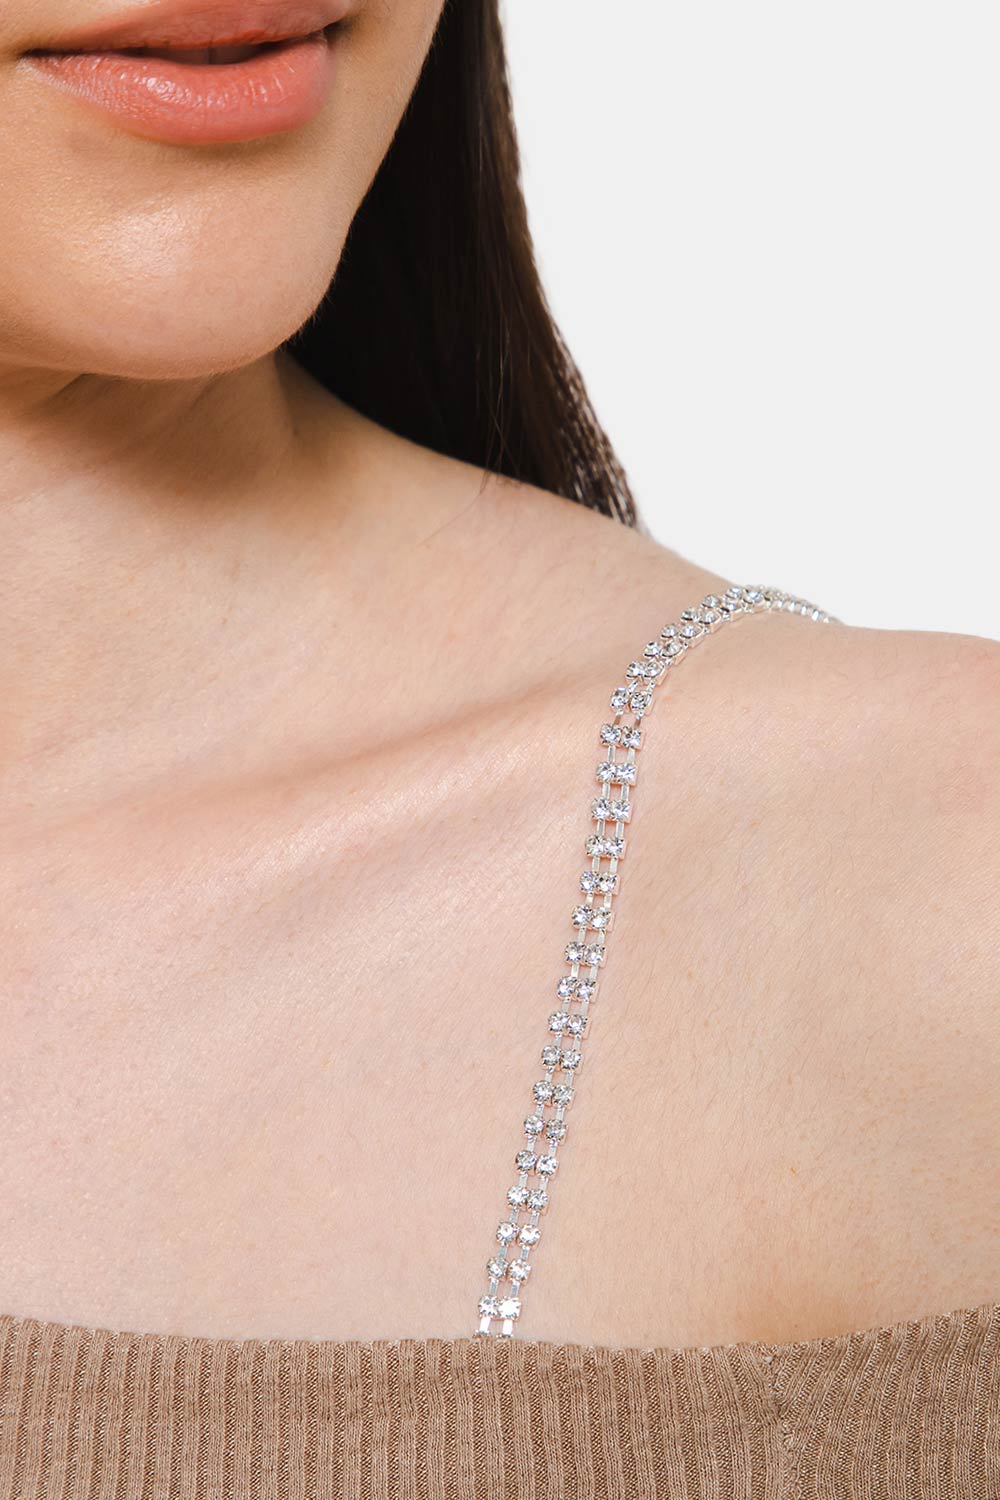 Intimacy Crystal Double Layer Detachable Strap - Silver